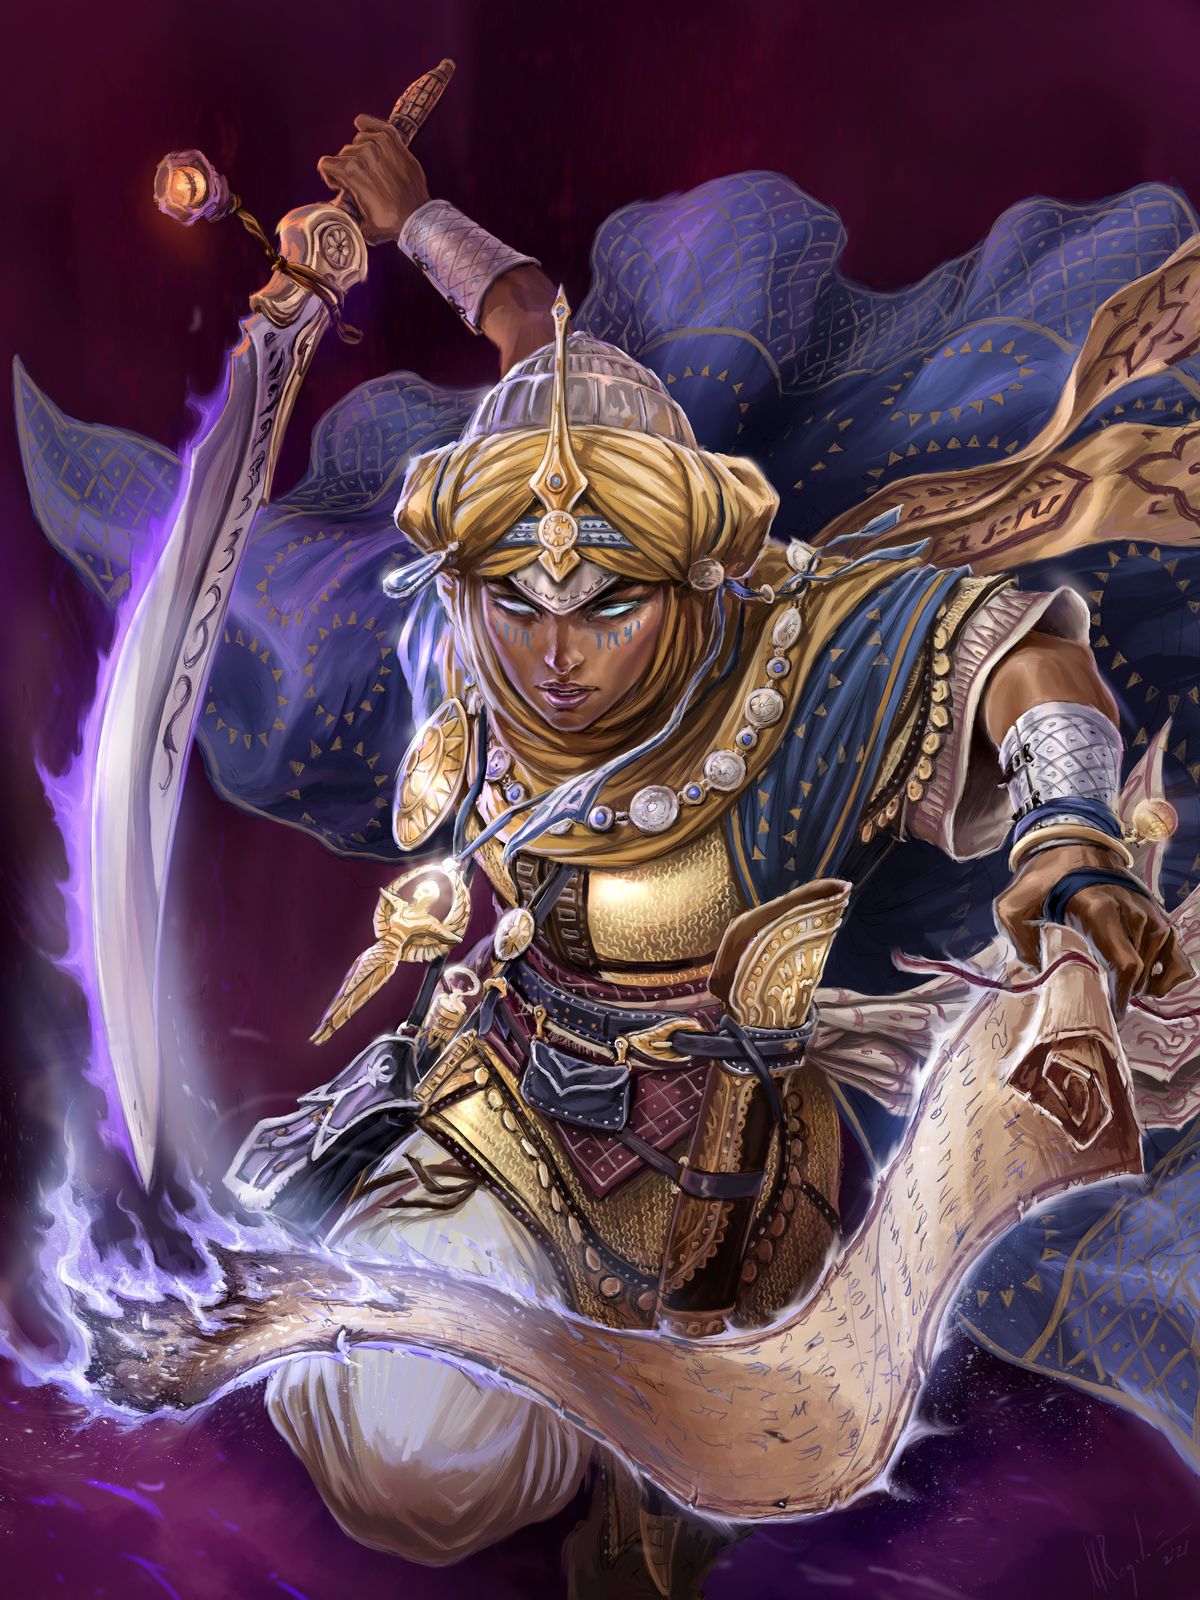 A woman dressed in golden armor with flowing blue ropes and a curving sword leaps out of the frame, a charged paper scroll burning in her hand.